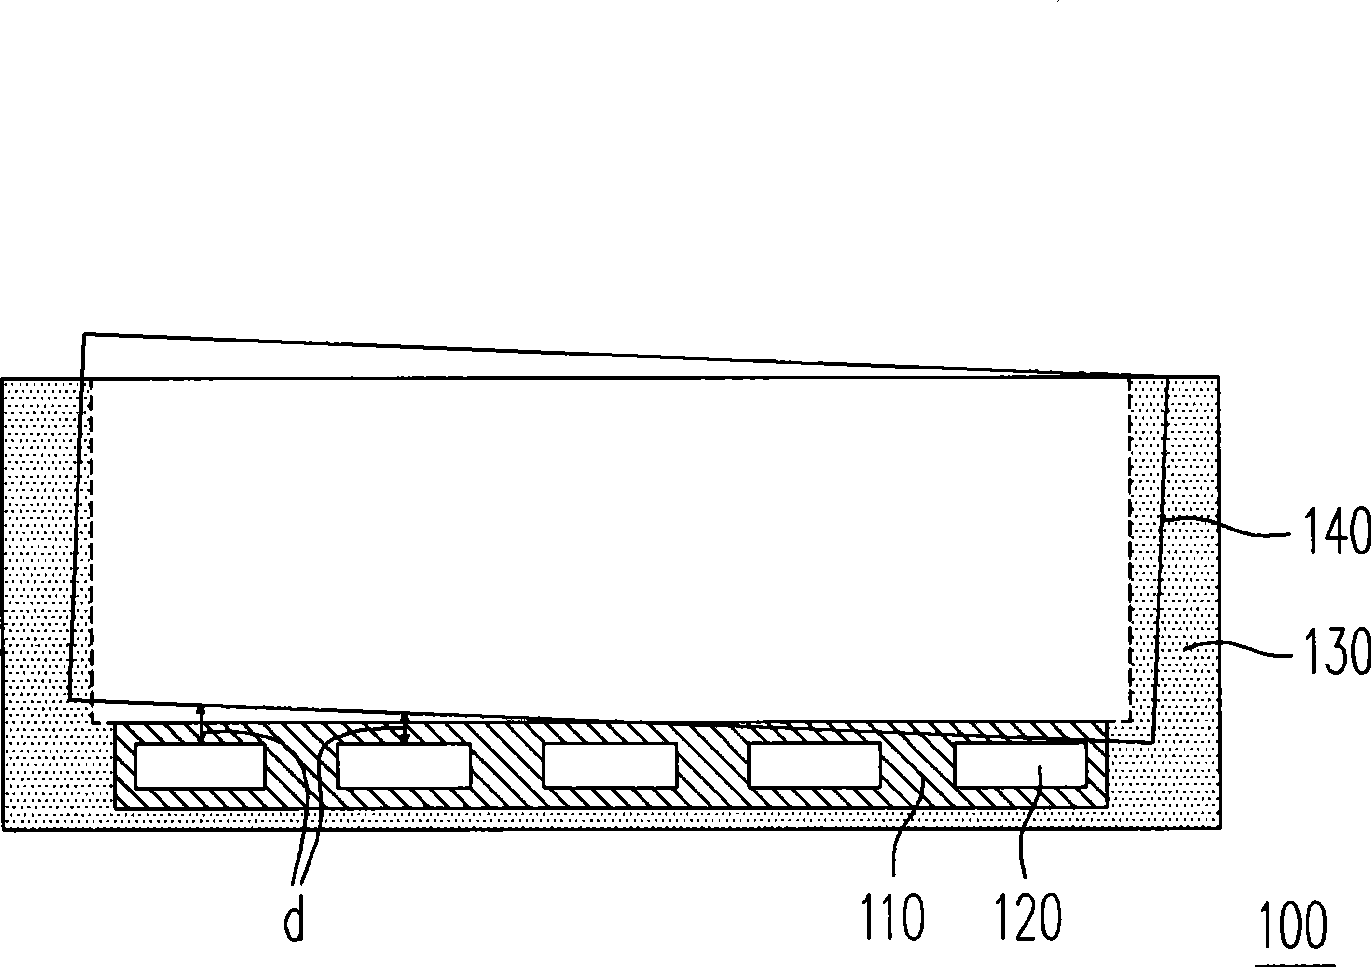 Backlight module and optoelectronic device